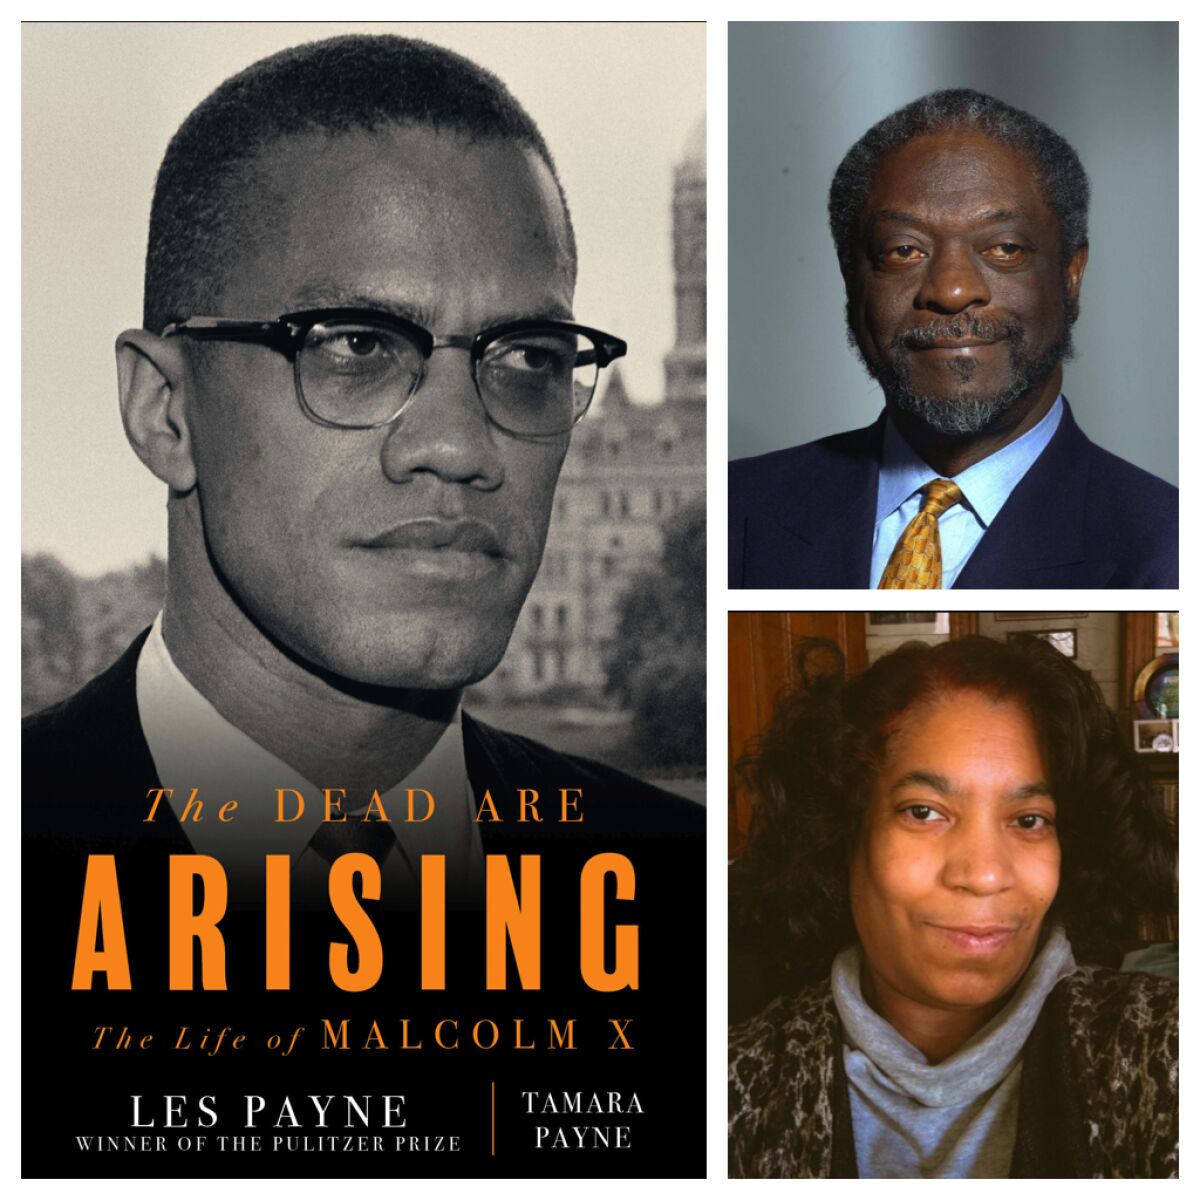 Les Payne and Tamara Payne are co-authors of "The Dead Are Arising: The Life of Malcolm X."